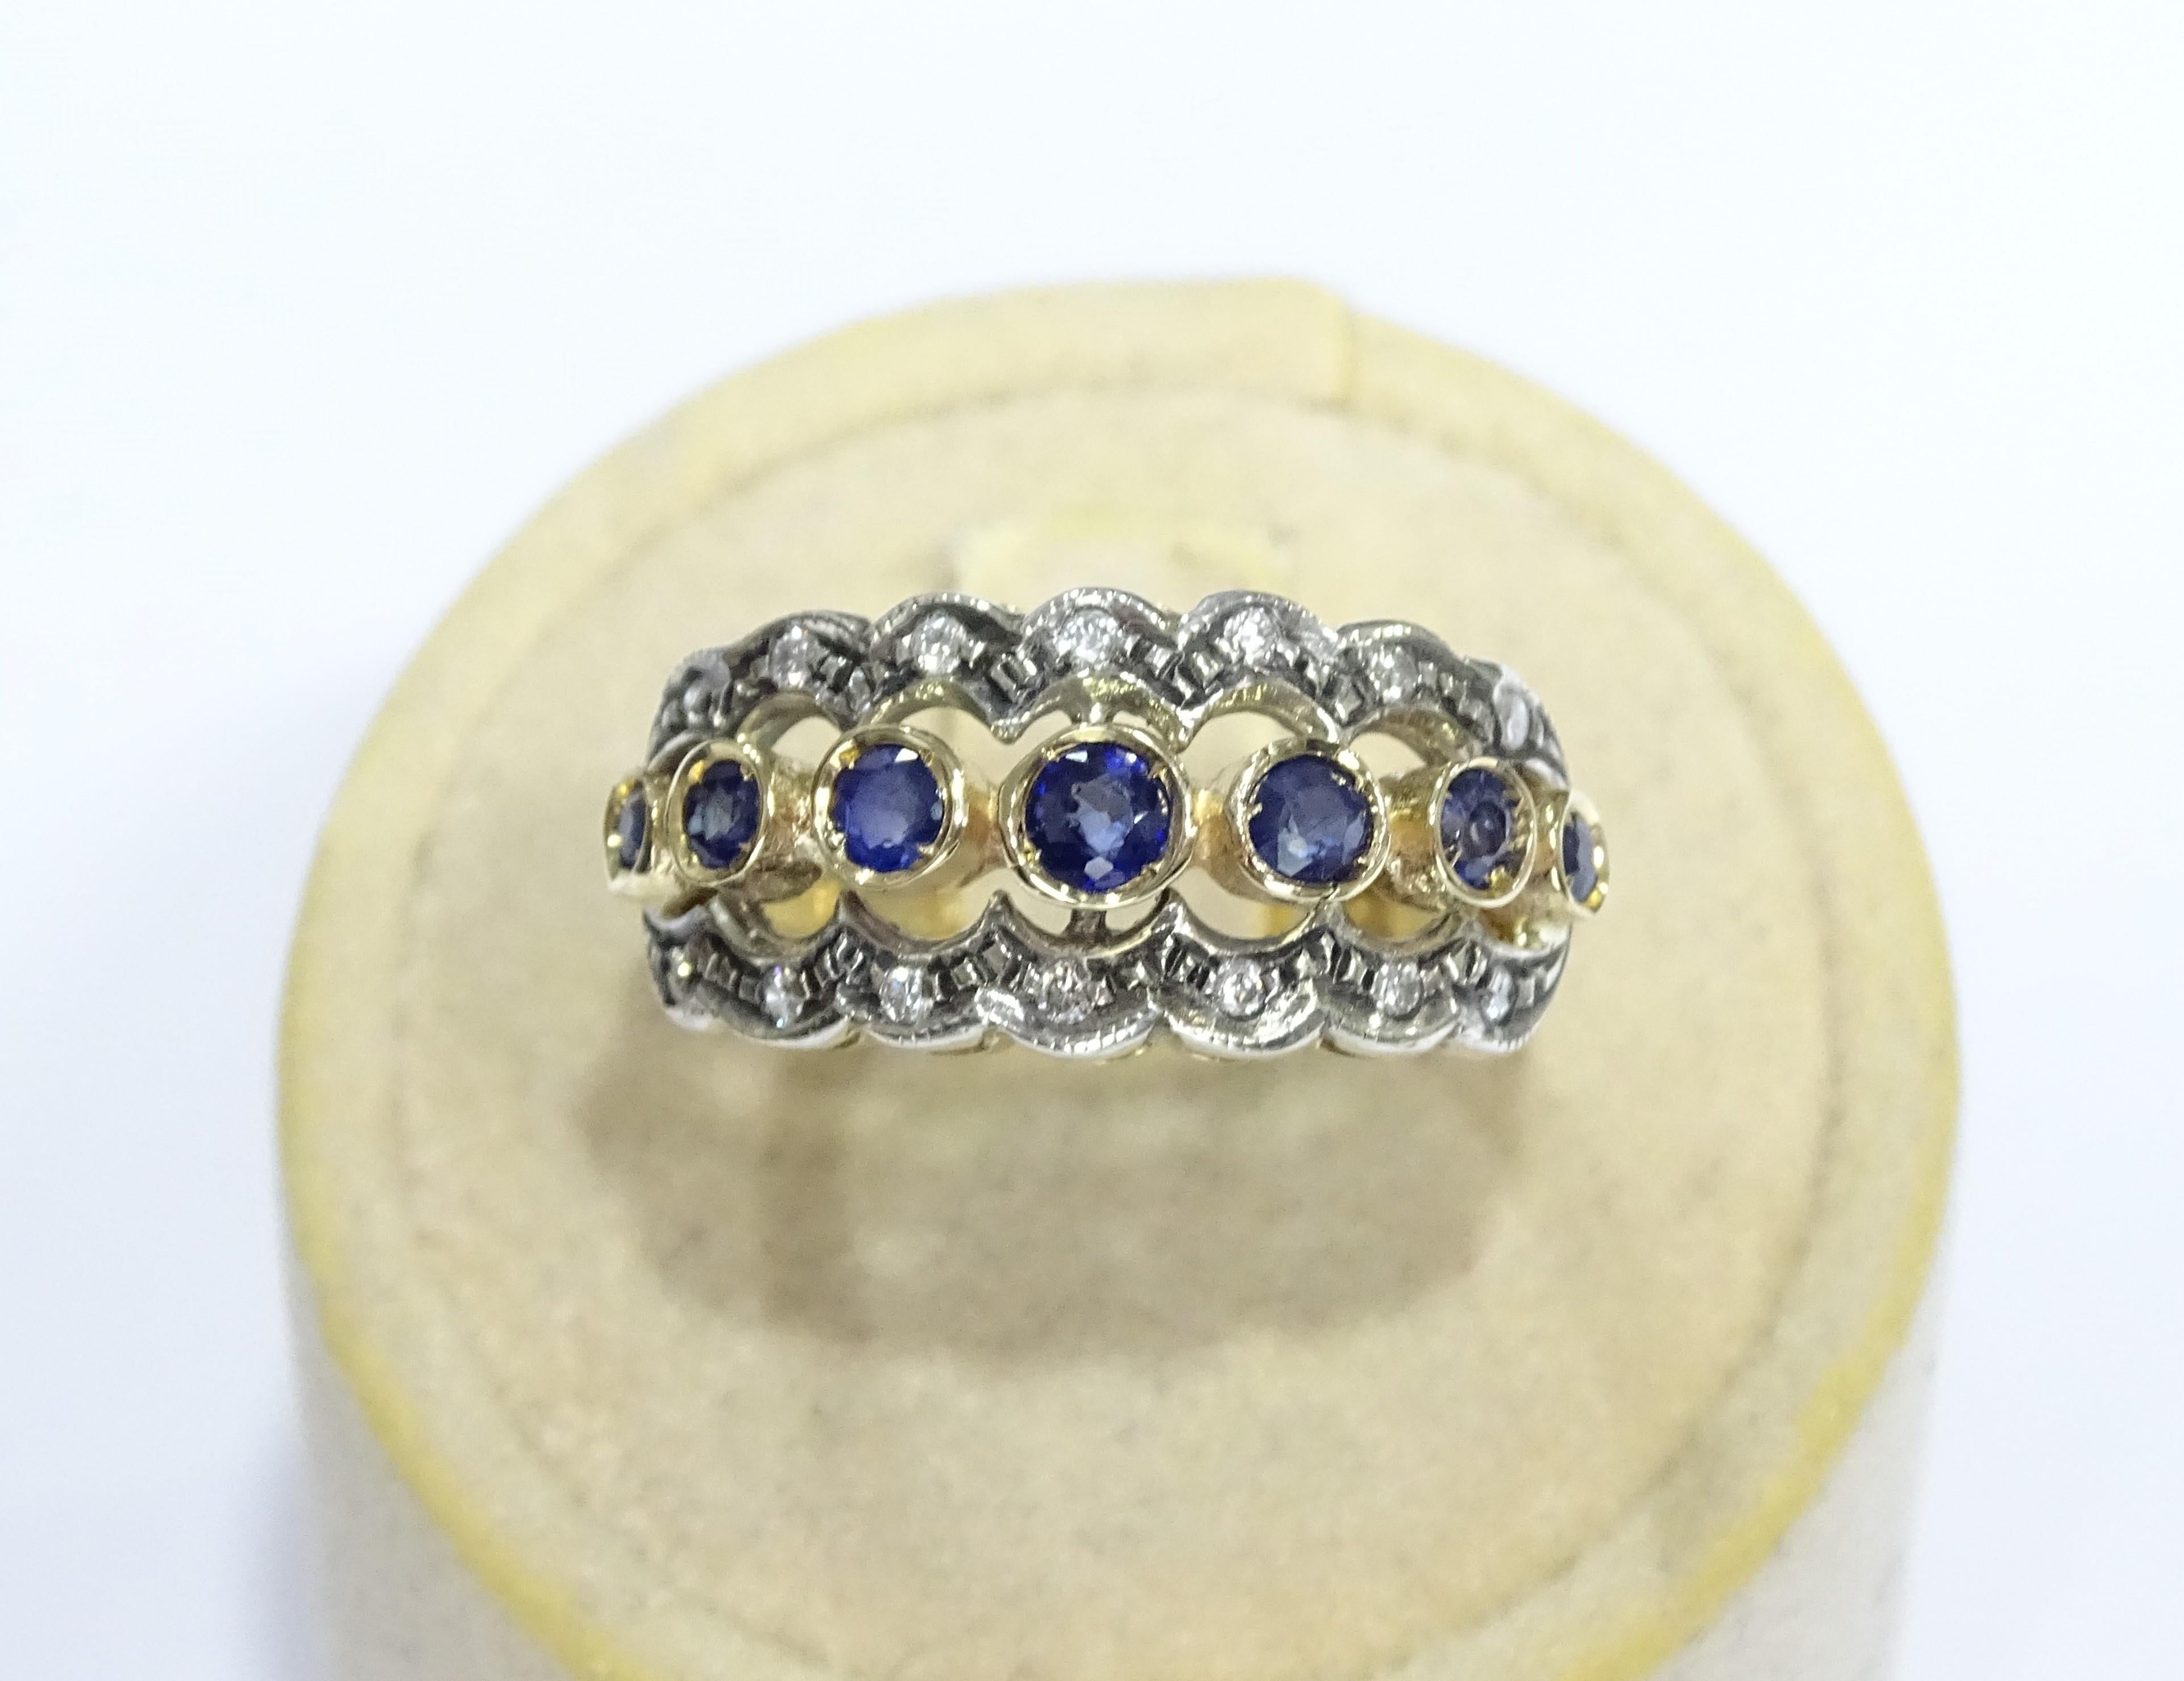 This Ring is made of 14K Yellow Gold and Sterling Silver.
This Ring has 0.14 Carats of Round Cut White Diamonds.
This Ring has 0.80 Carats of Sapphires.
This Ring is also available, on request, with Rubies or Emeralds.
This Ring is inspired by Art